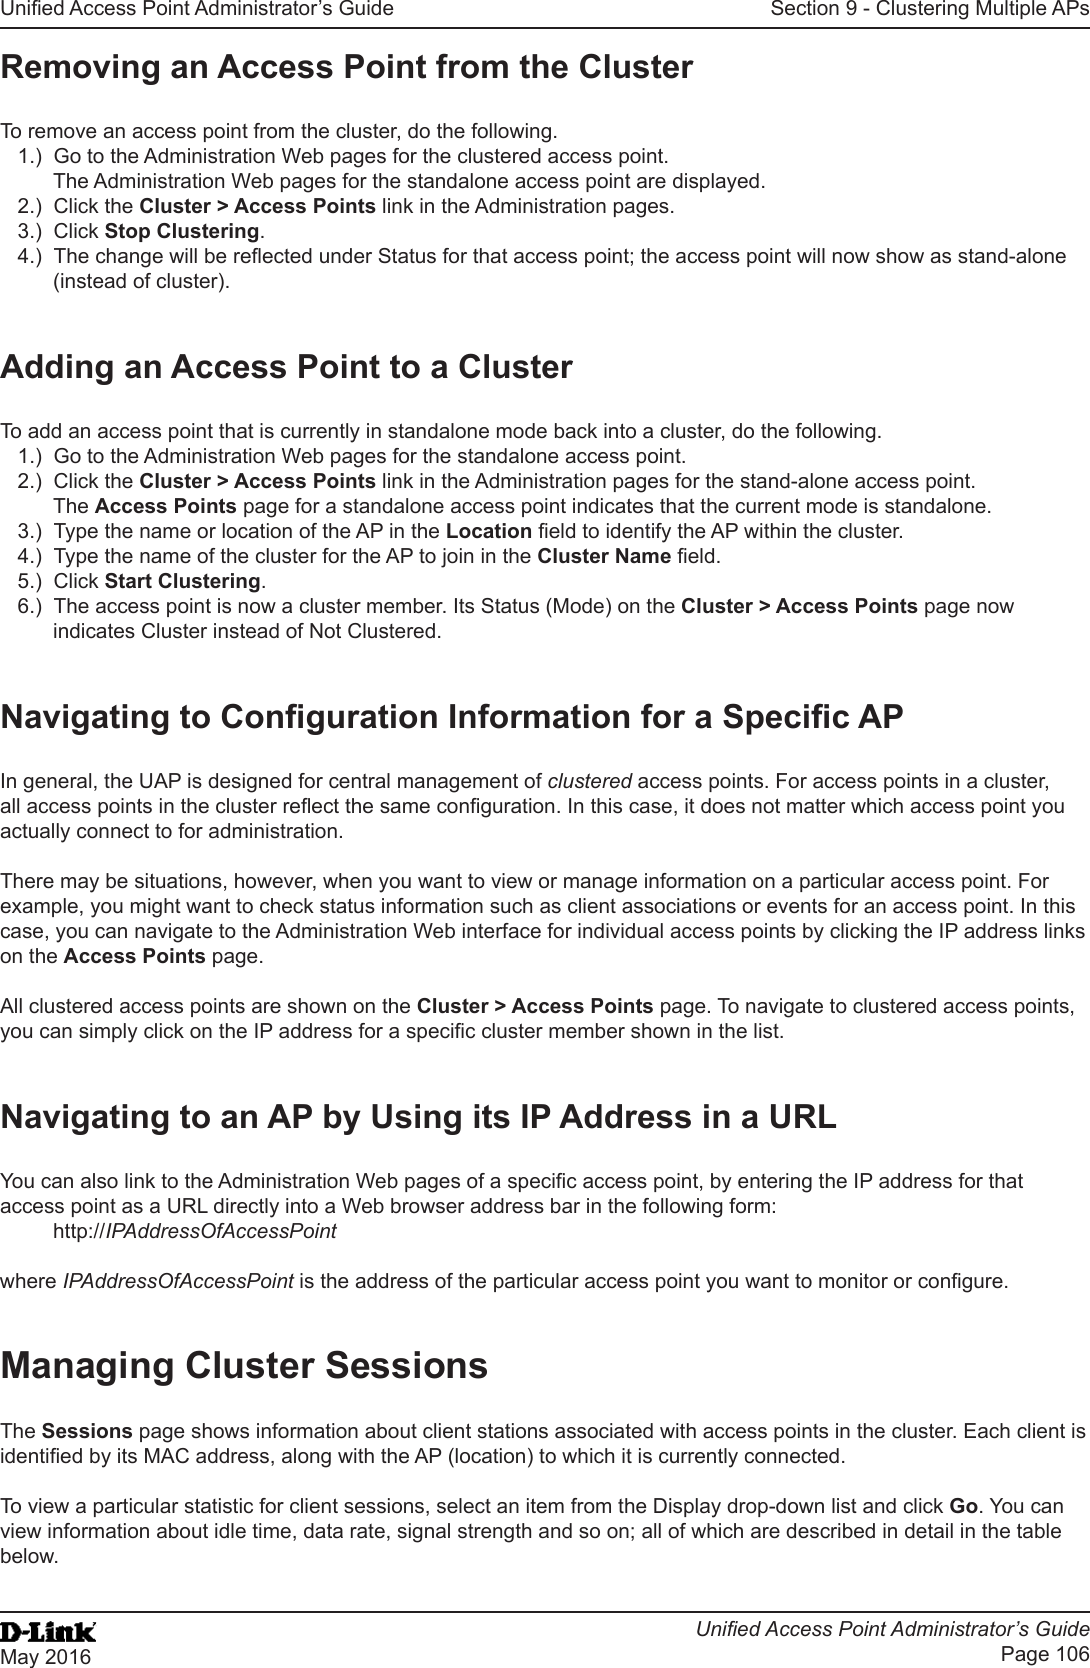 Unied Access Point Administrator’s GuideUnied Access Point Administrator’s GuidePage 106May 2016Section 9 - Clustering Multiple APsRemoving an Access Point from the ClusterTo remove an access point from the cluster, do the following.1.)  Go to the Administration Web pages for the clustered access point. The Administration Web pages for the standalone access point are displayed.2.)  Click the Cluster &gt; Access Points link in the Administration pages.3.)  Click Stop Clustering.4.)  The change will be reected under Status for that access point; the access point will now show as stand-alone (instead of cluster).Adding an Access Point to a ClusterTo add an access point that is currently in standalone mode back into a cluster, do the following.1.)  Go to the Administration Web pages for the standalone access point.2.)  Click the Cluster &gt; Access Points link in the Administration pages for the stand-alone access point.The Access Points page for a standalone access point indicates that the current mode is standalone.3.)  Type the name or location of the AP in the Location eld to identify the AP within the cluster.4.)  Type the name of the cluster for the AP to join in the Cluster Name eld.5.)  Click Start Clustering.6.)  The access point is now a cluster member. Its Status (Mode) on the Cluster &gt; Access Points page now indicates Cluster instead of Not Clustered.Navigating to Conguration Information for a Specic APIn general, the UAP is designed for central management of clustered access points. For access points in a cluster, all access points in the cluster reect the same conguration. In this case, it does not matter which access point you actually connect to for administration.There may be situations, however, when you want to view or manage information on a particular access point. For example, you might want to check status information such as client associations or events for an access point. In this case, you can navigate to the Administration Web interface for individual access points by clicking the IP address links on the Access Points page.All clustered access points are shown on the Cluster &gt; Access Points page. To navigate to clustered access points, you can simply click on the IP address for a specic cluster member shown in the list.Navigating to an AP by Using its IP Address in a URLYou can also link to the Administration Web pages of a specic access point, by entering the IP address for that access point as a URL directly into a Web browser address bar in the following form:http://IPAddressOfAccessPointwhere IPAddressOfAccessPoint is the address of the particular access point you want to monitor or congure.Managing Cluster SessionsThe Sessions page shows information about client stations associated with access points in the cluster. Each client is identied by its MAC address, along with the AP (location) to which it is currently connected.To view a particular statistic for client sessions, select an item from the Display drop-down list and click Go. You can view information about idle time, data rate, signal strength and so on; all of which are described in detail in the table below.